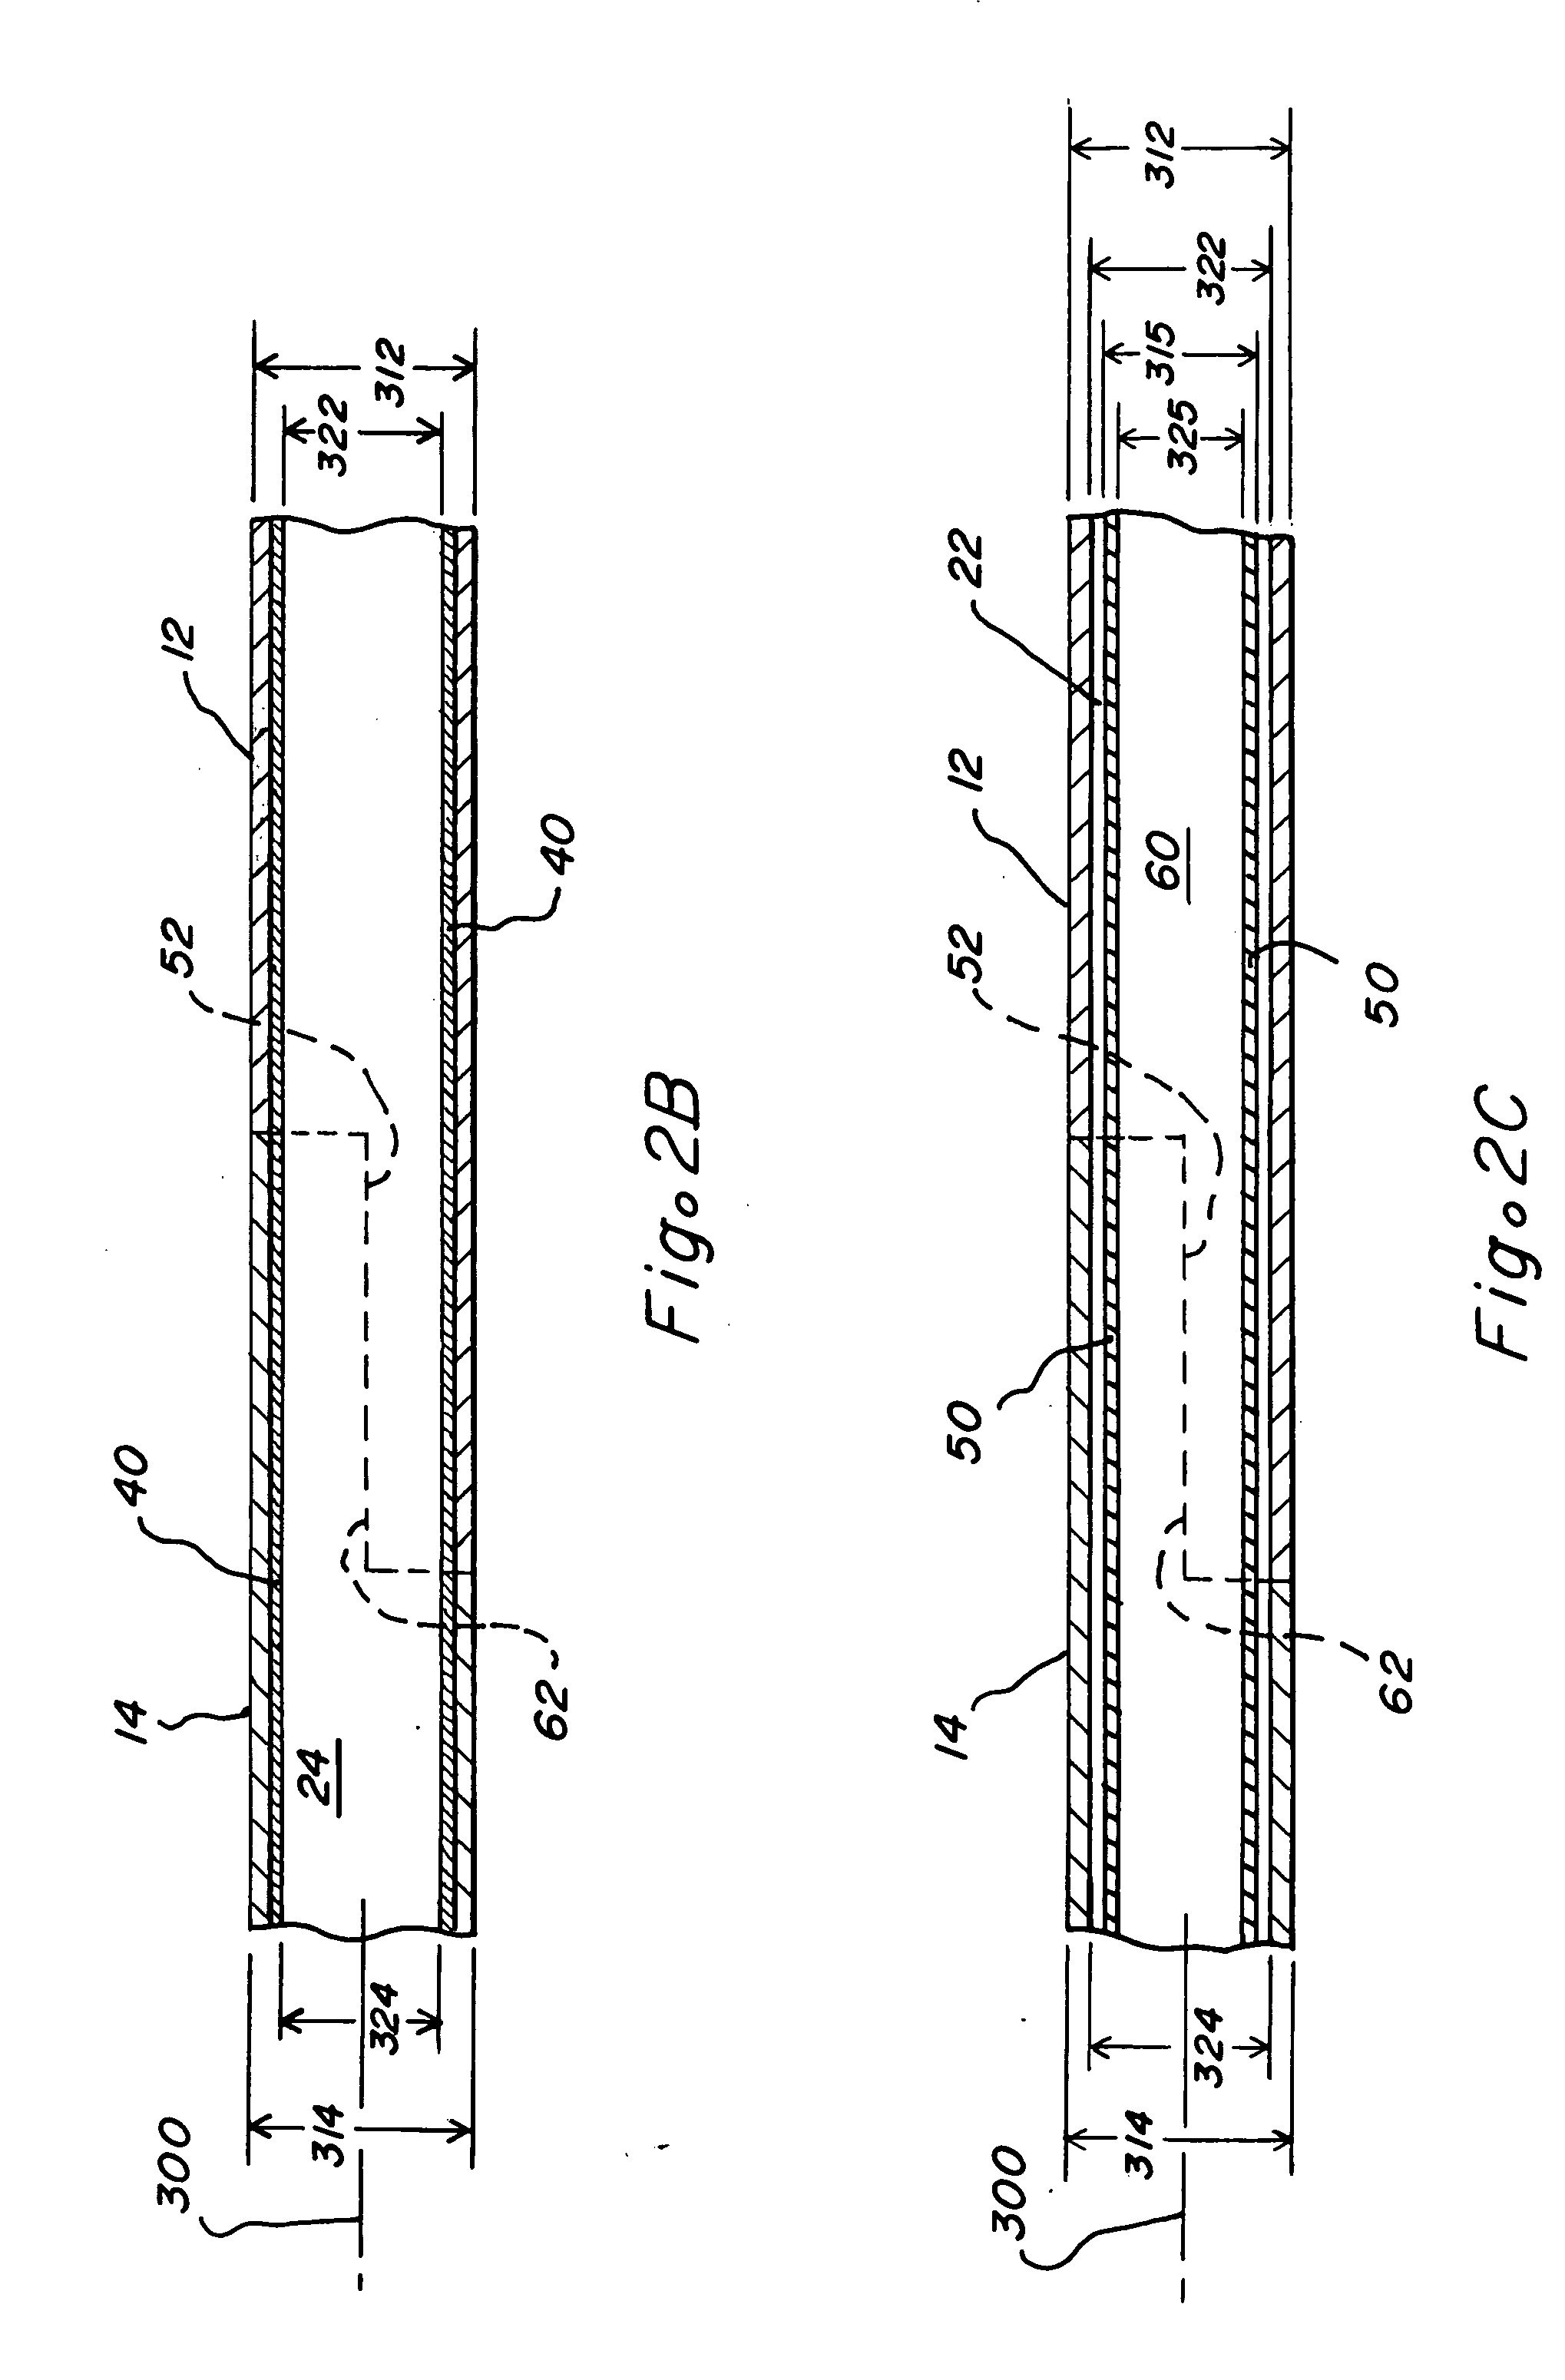 Occluding guidewire and methods